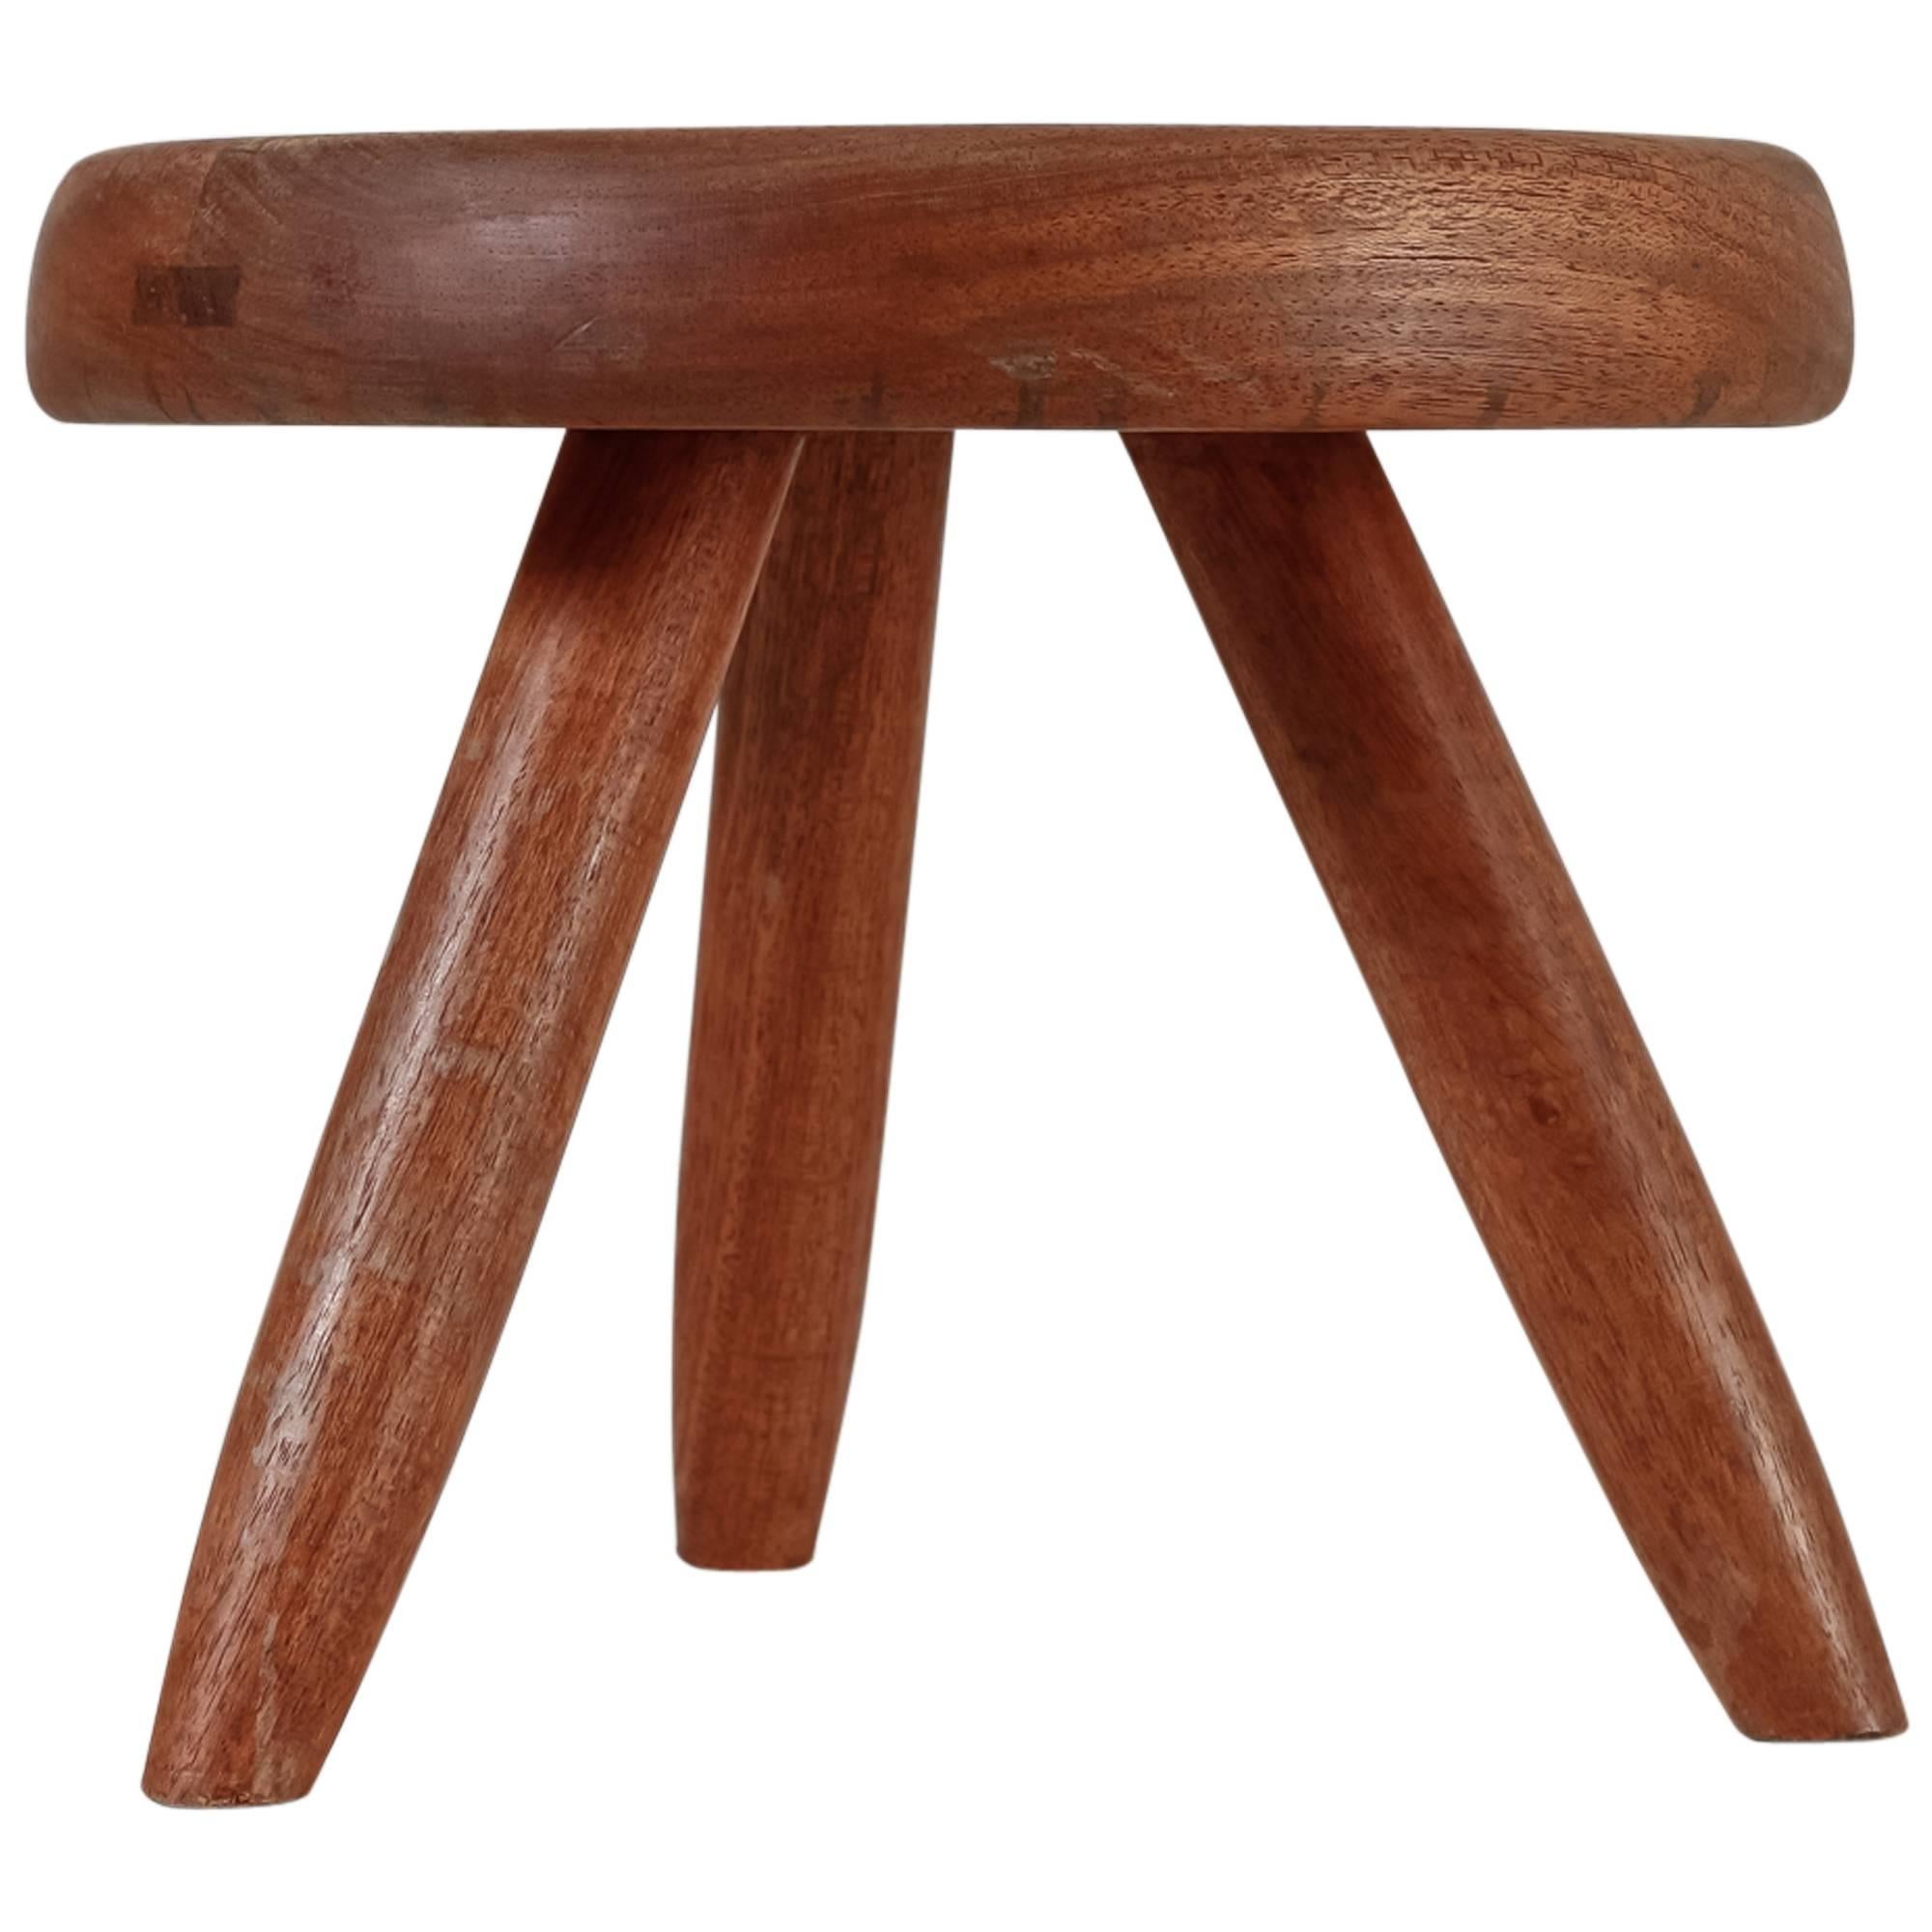 Charlotte Perriand Low Teak Tripod Stool, France, 1960s For Sale